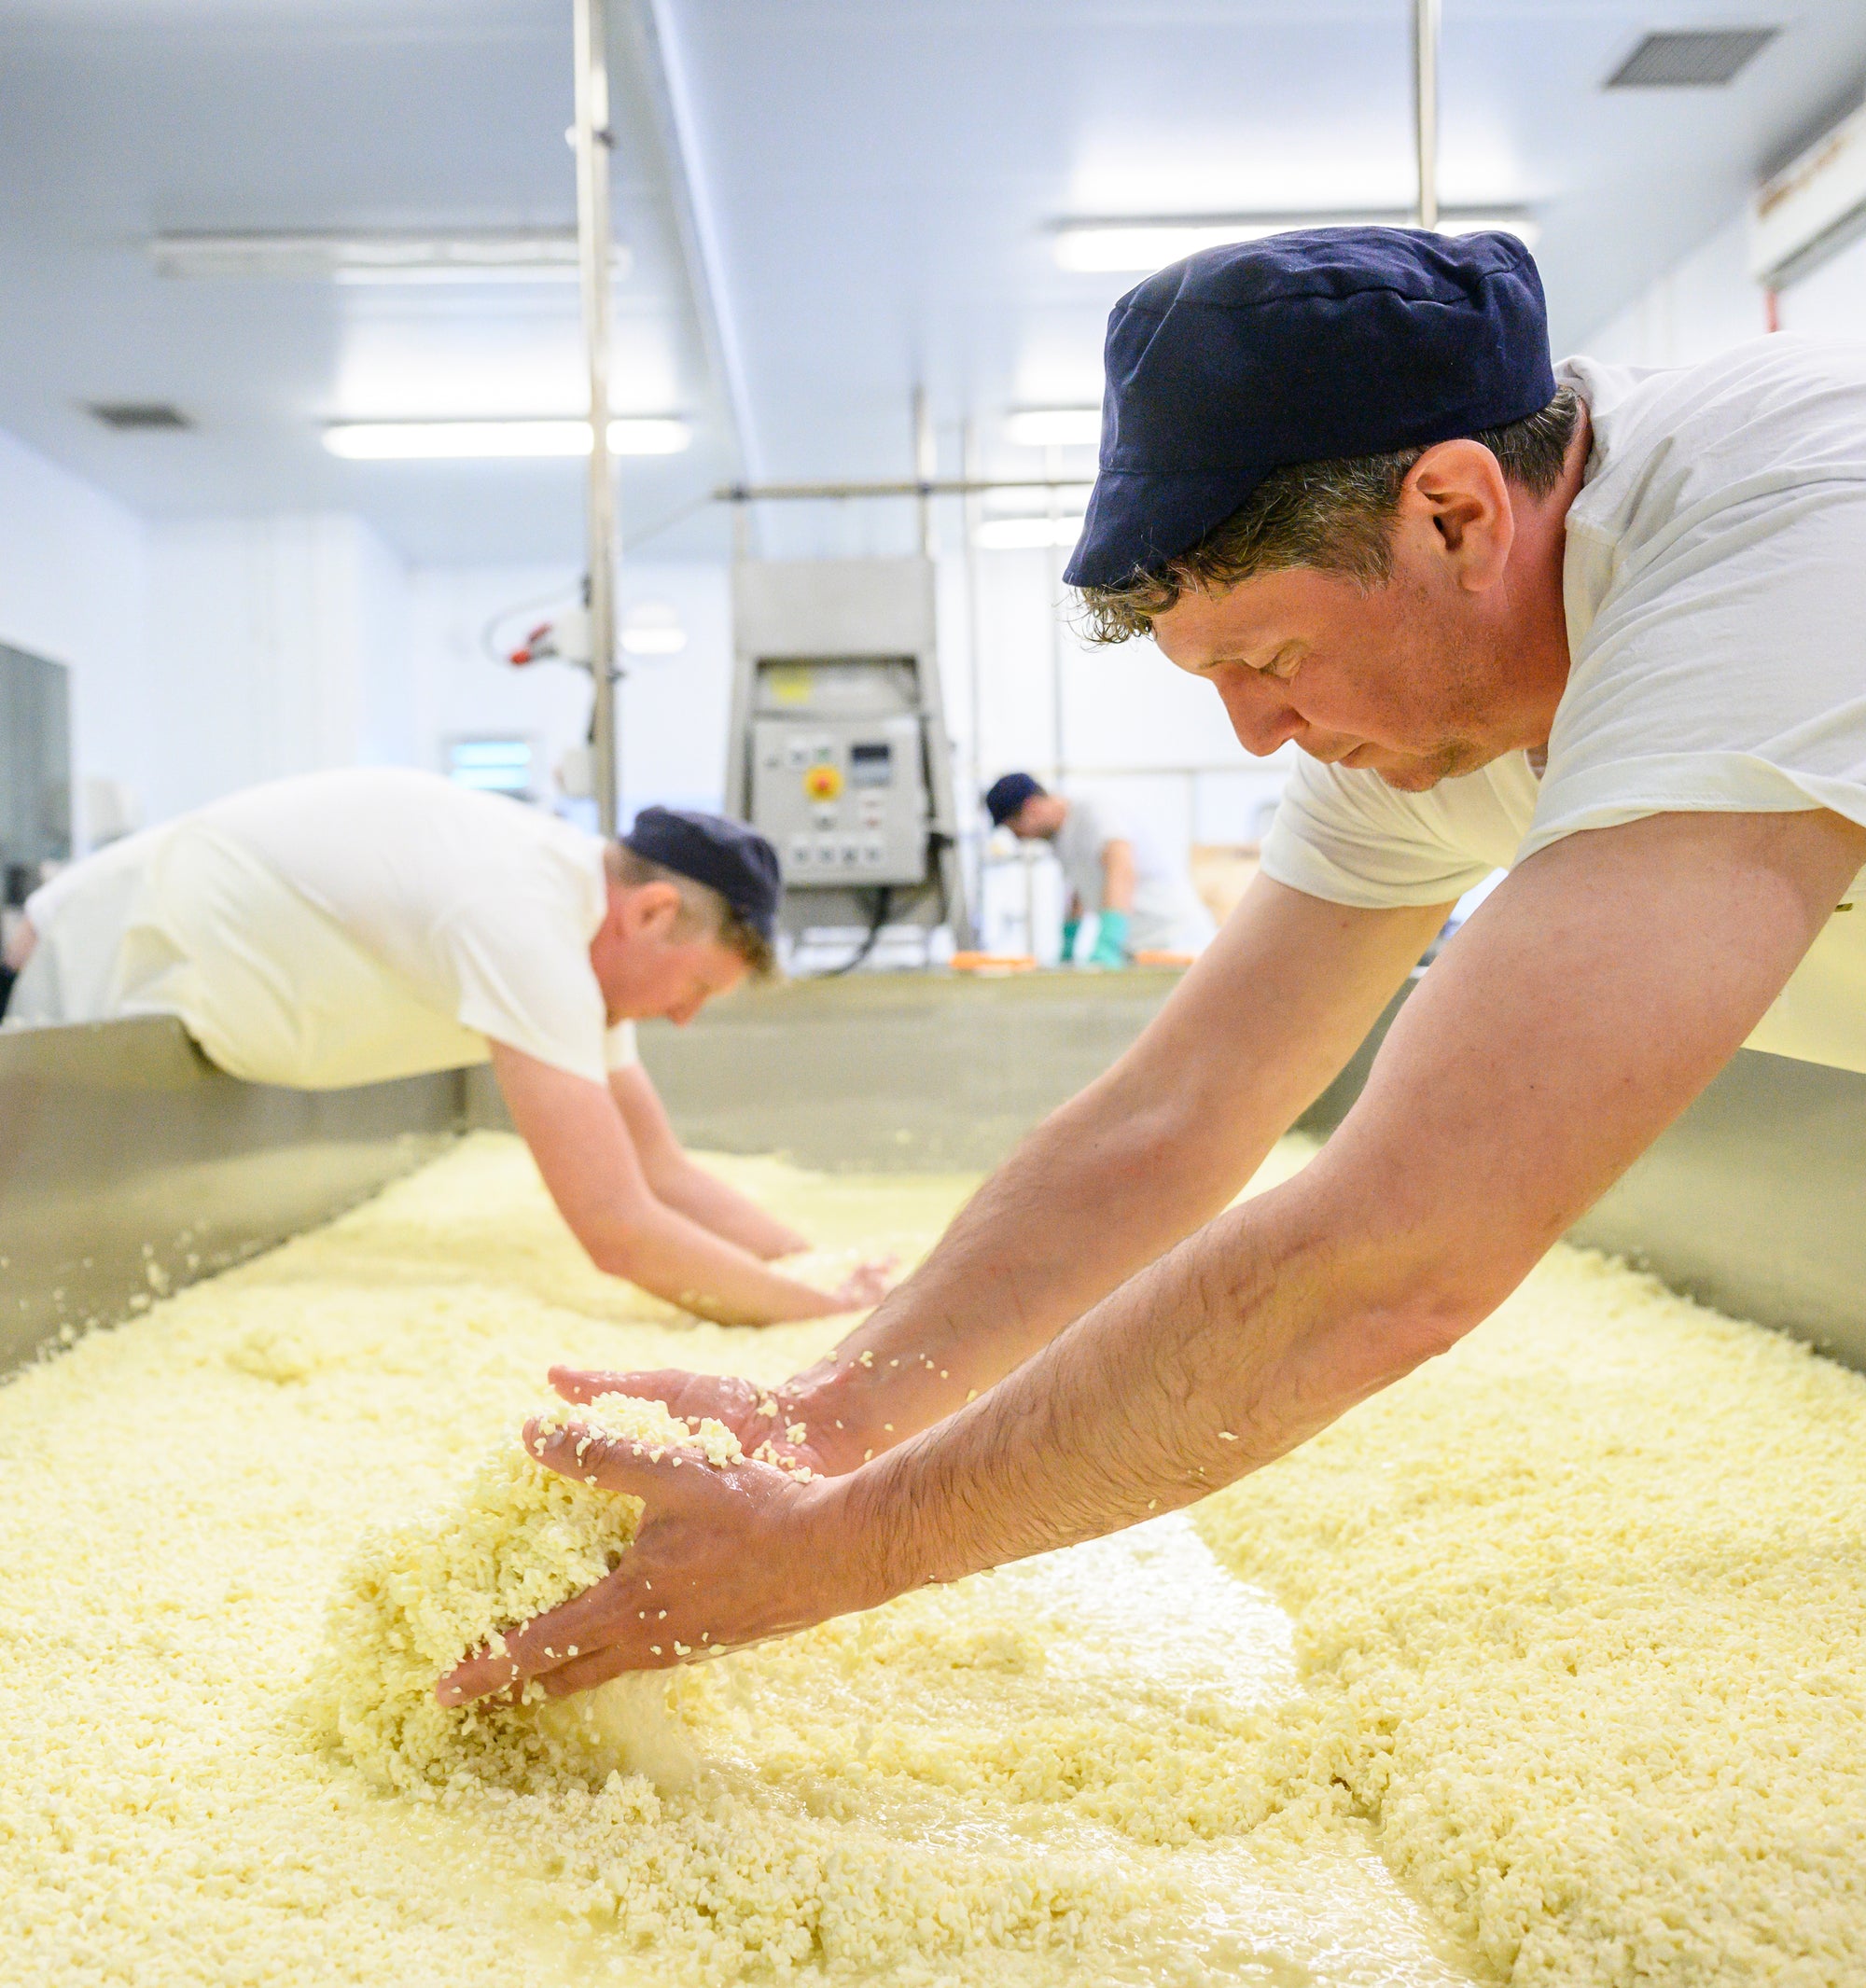 Curds and whey draining, handmade cheese makers. The Trethowan Brothers.